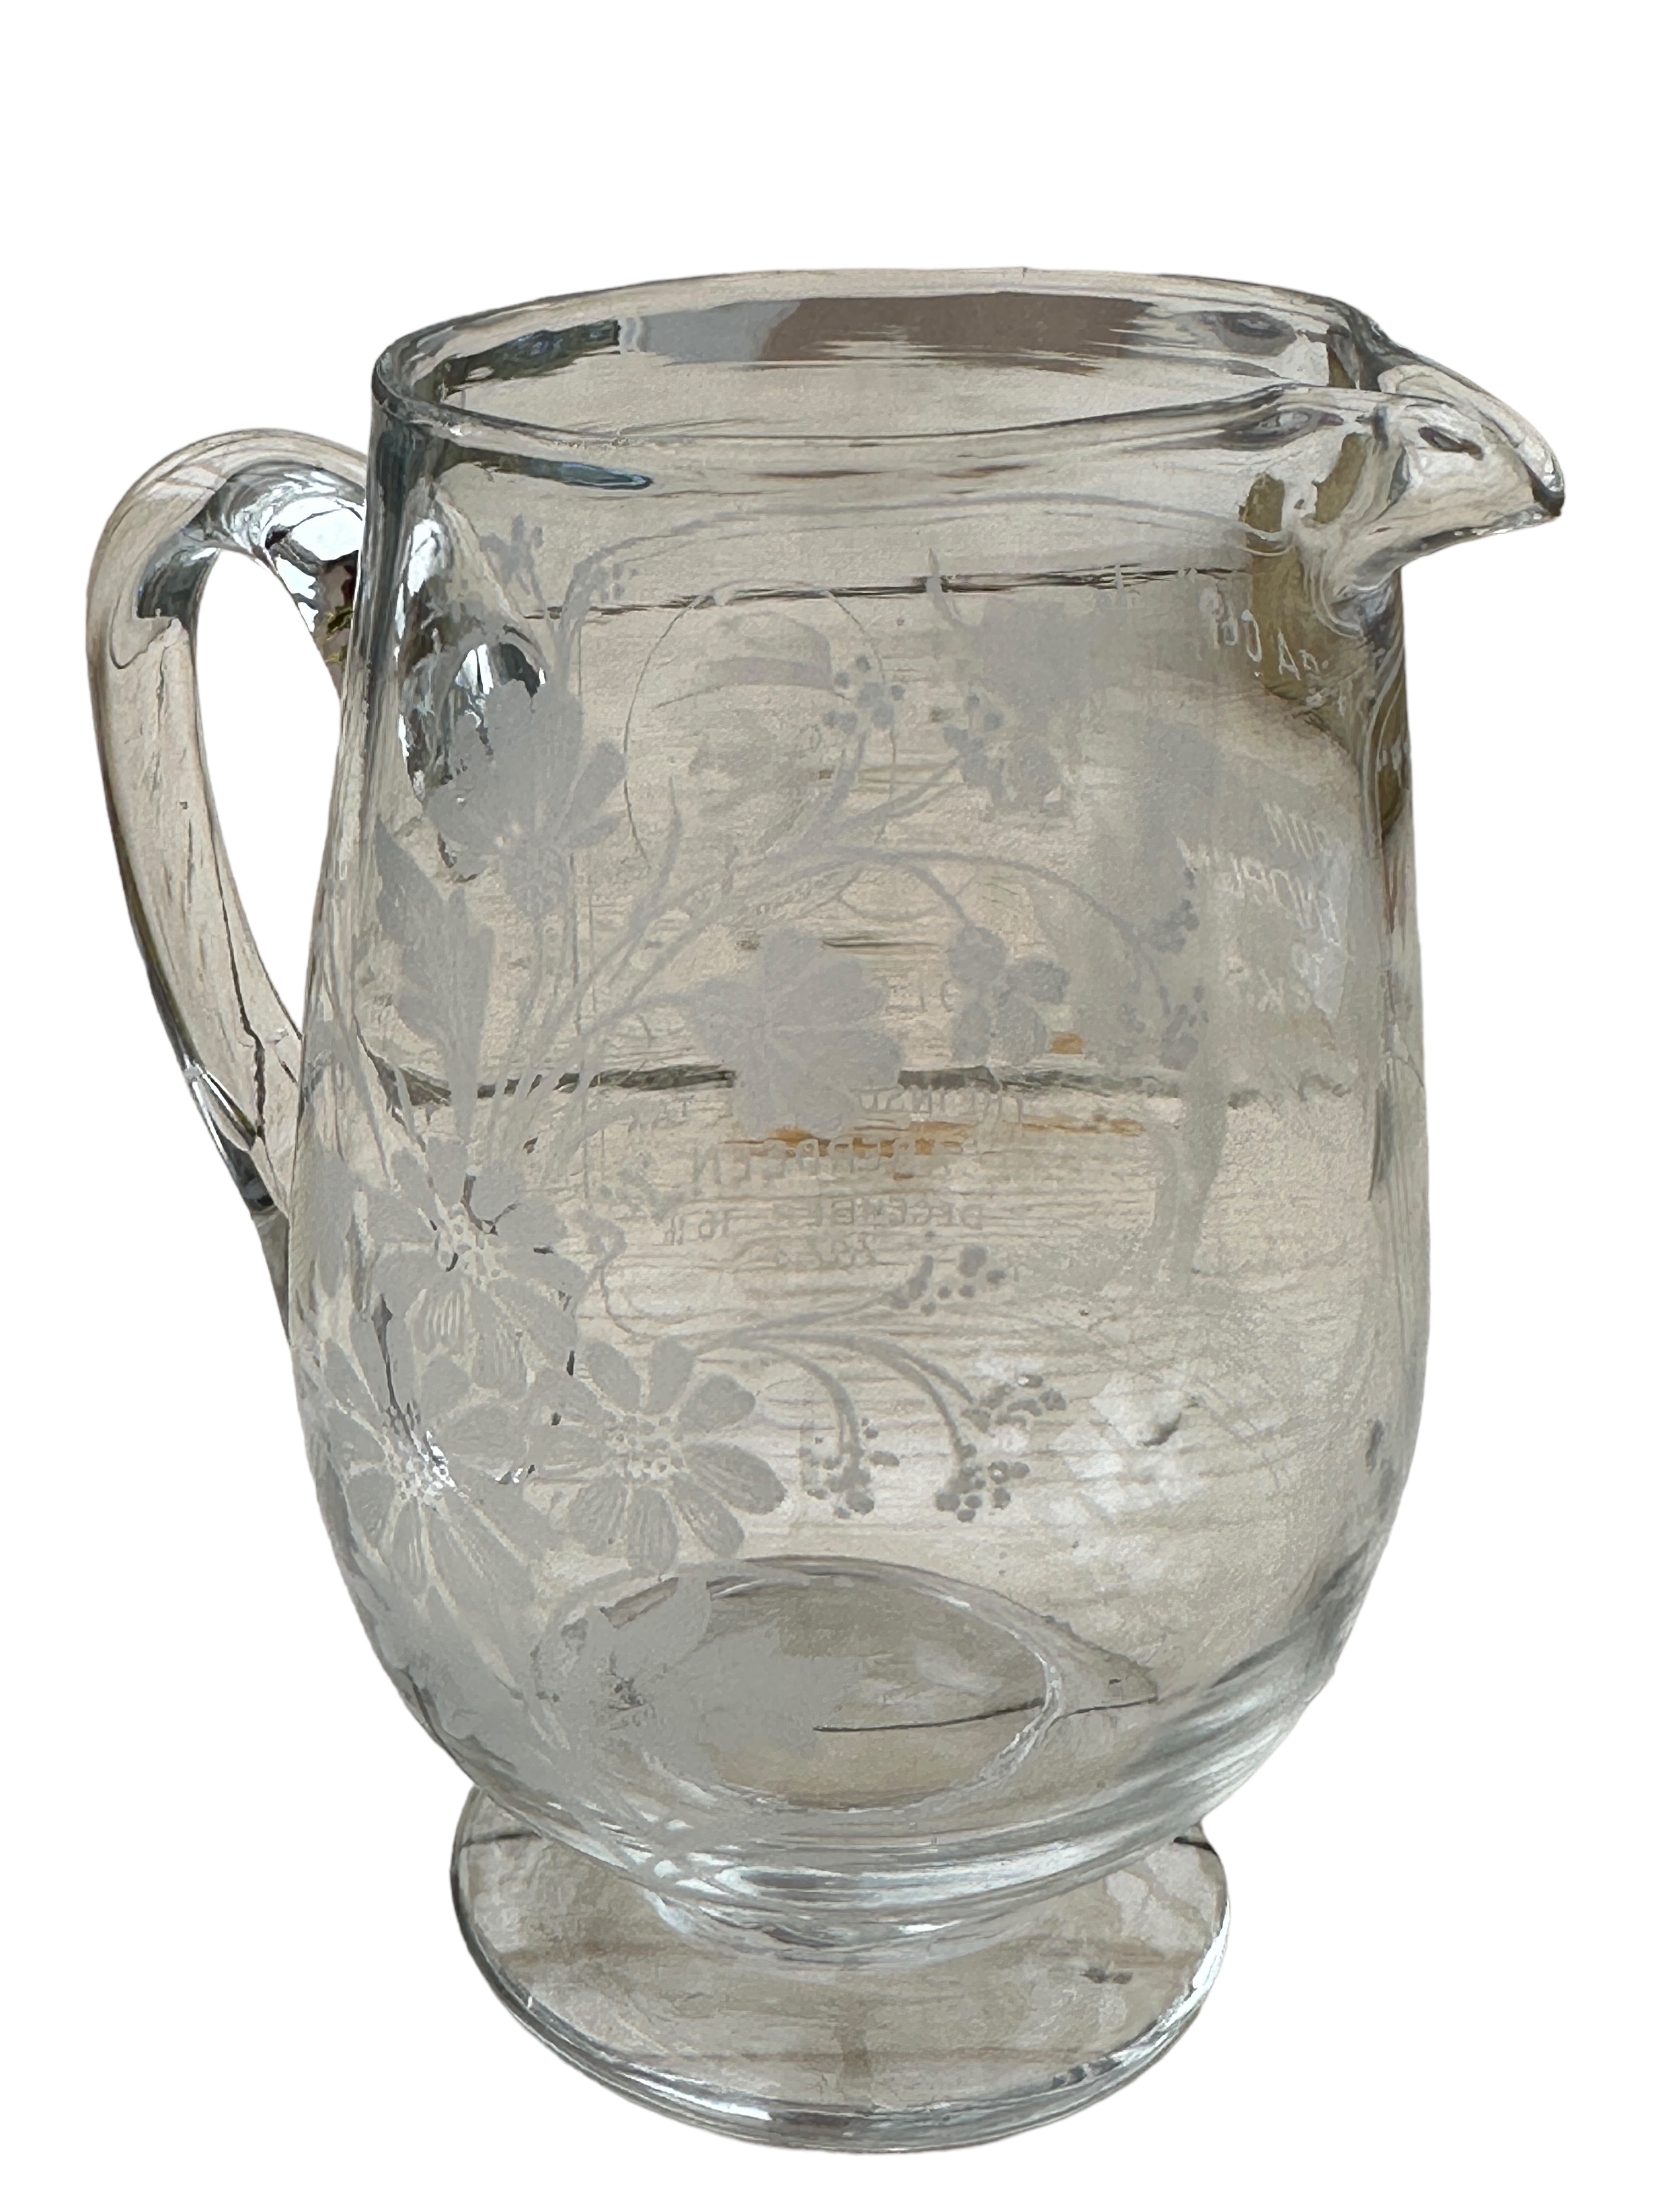 Antique Glass " The Turra Coo from Lendrum to Leeks" Jug - 4" tall. Condition Report: It is our - Image 8 of 8